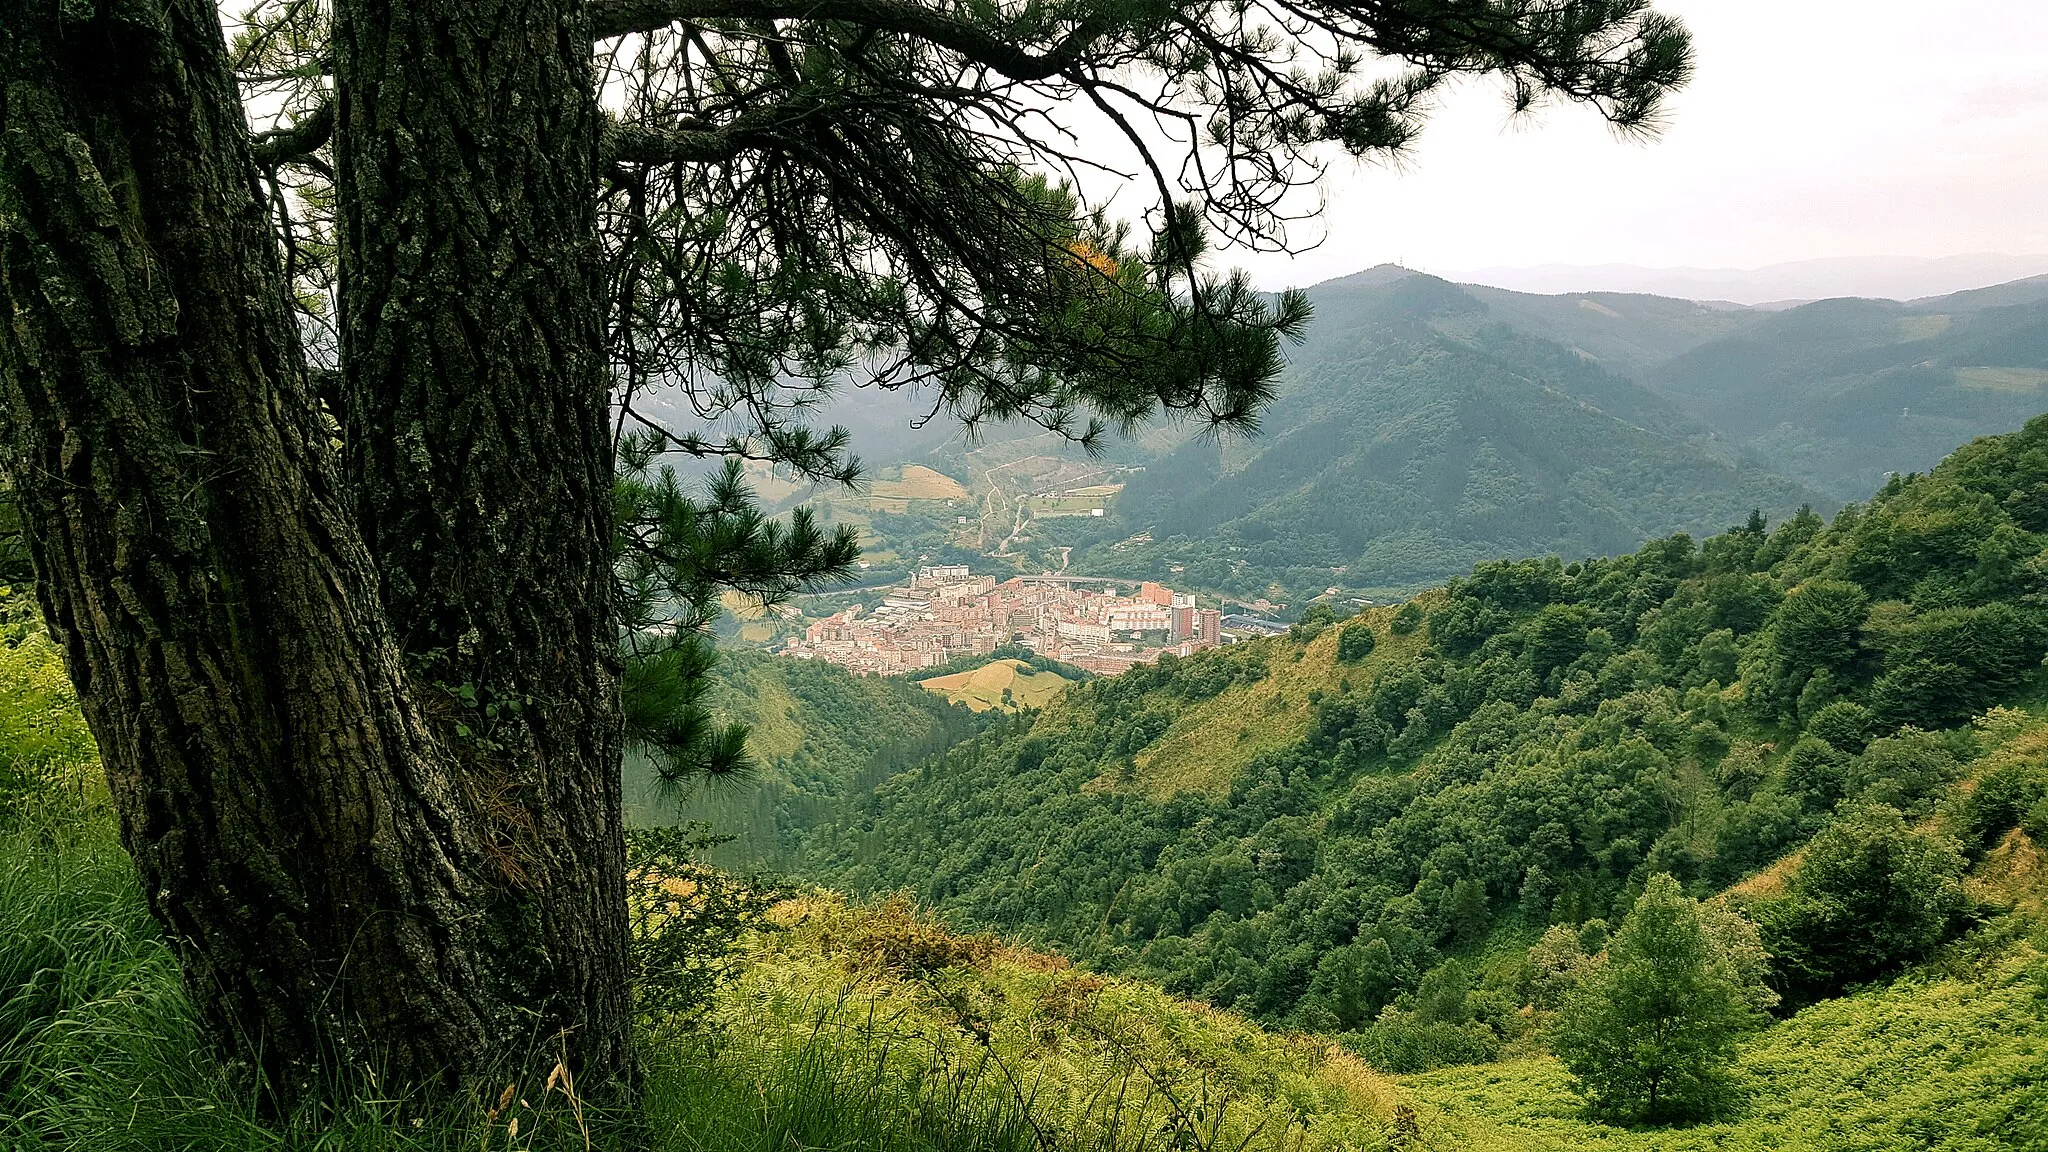 Photo showing: The city of Eibar seen from Mount Urko